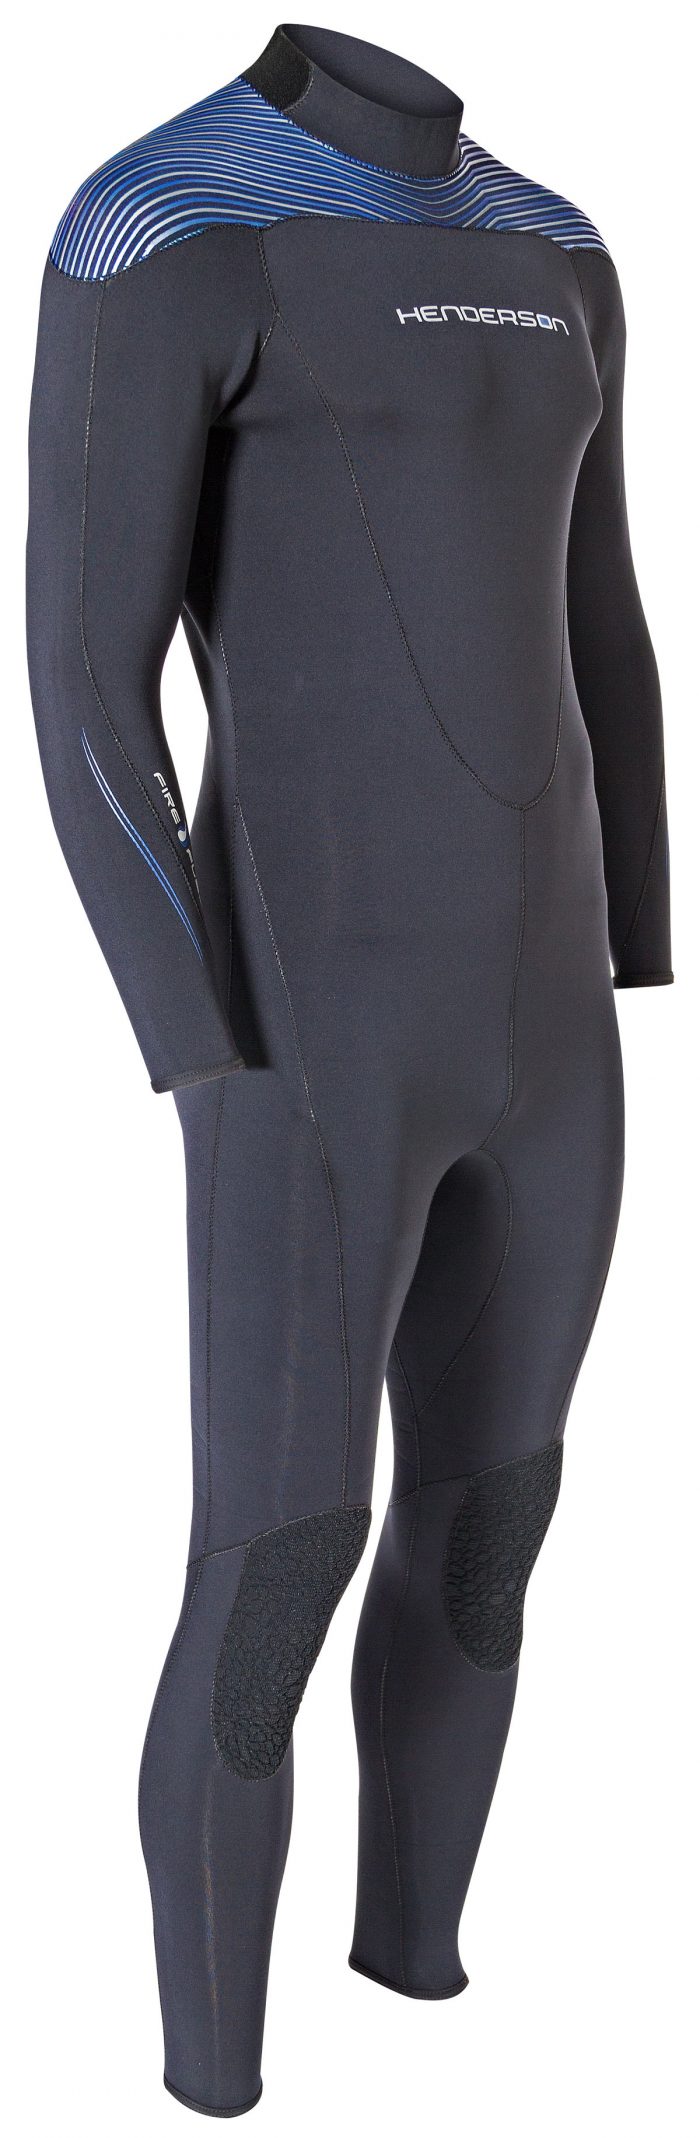 right side of Black / White / Blue Wetsuit